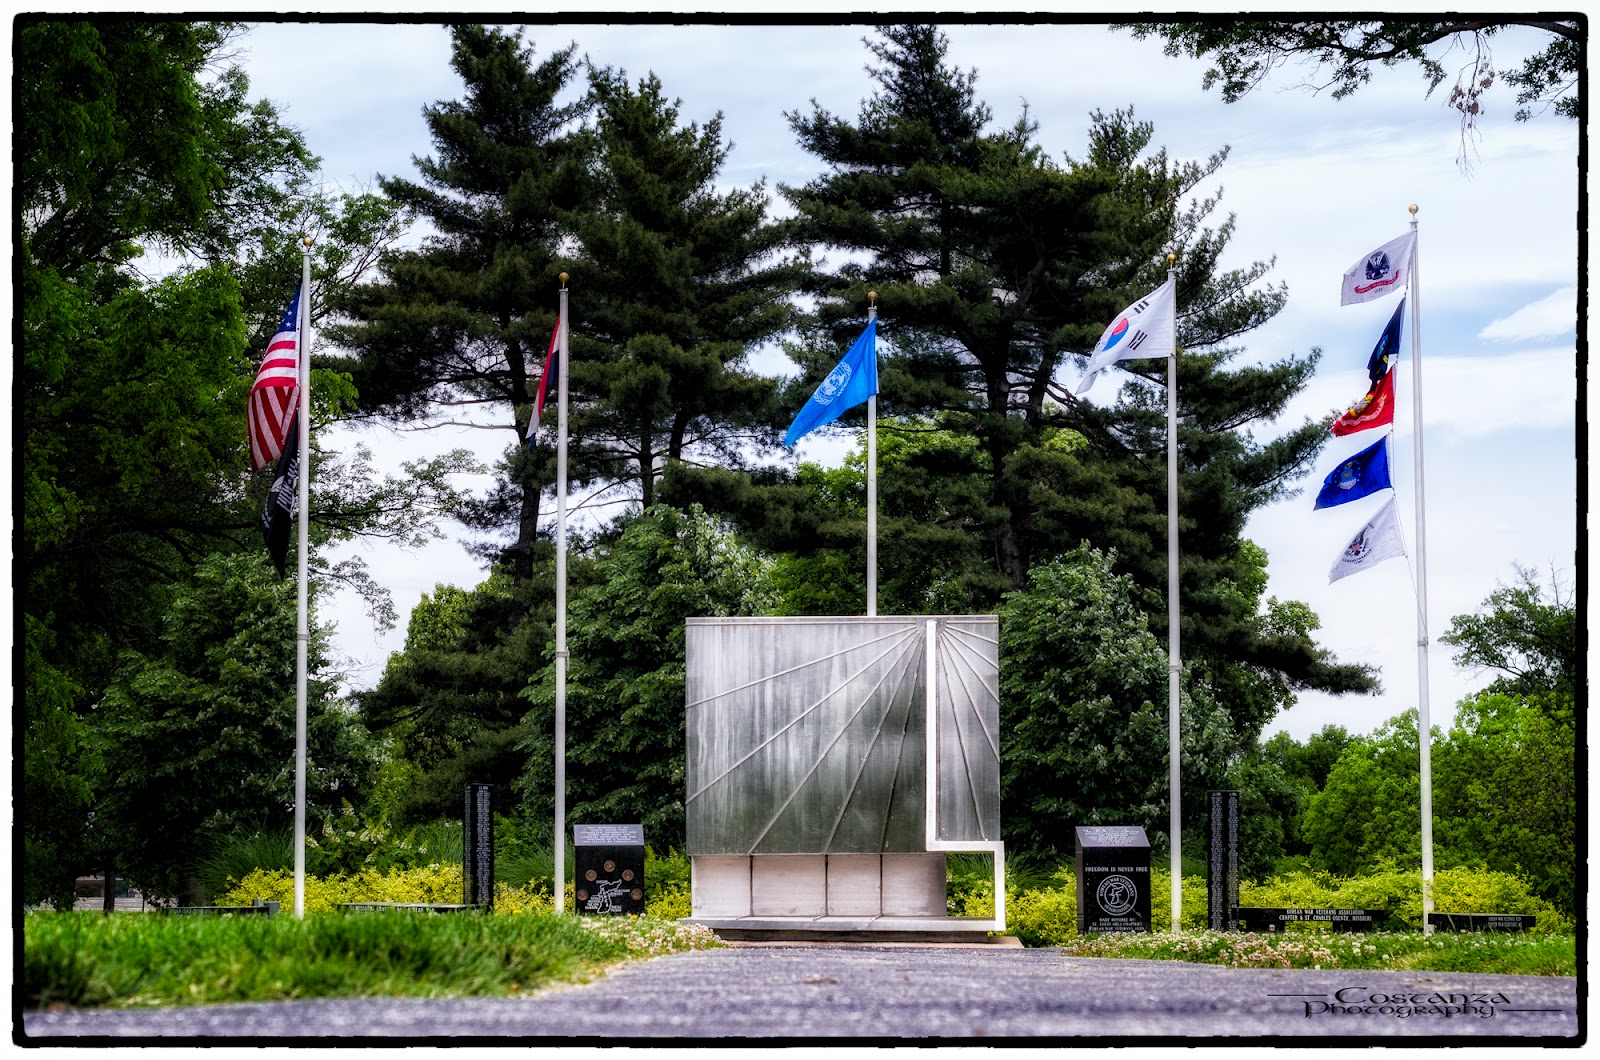 Forest Park and Korean War Memorial | Costanza Photography - St. Louis, MO